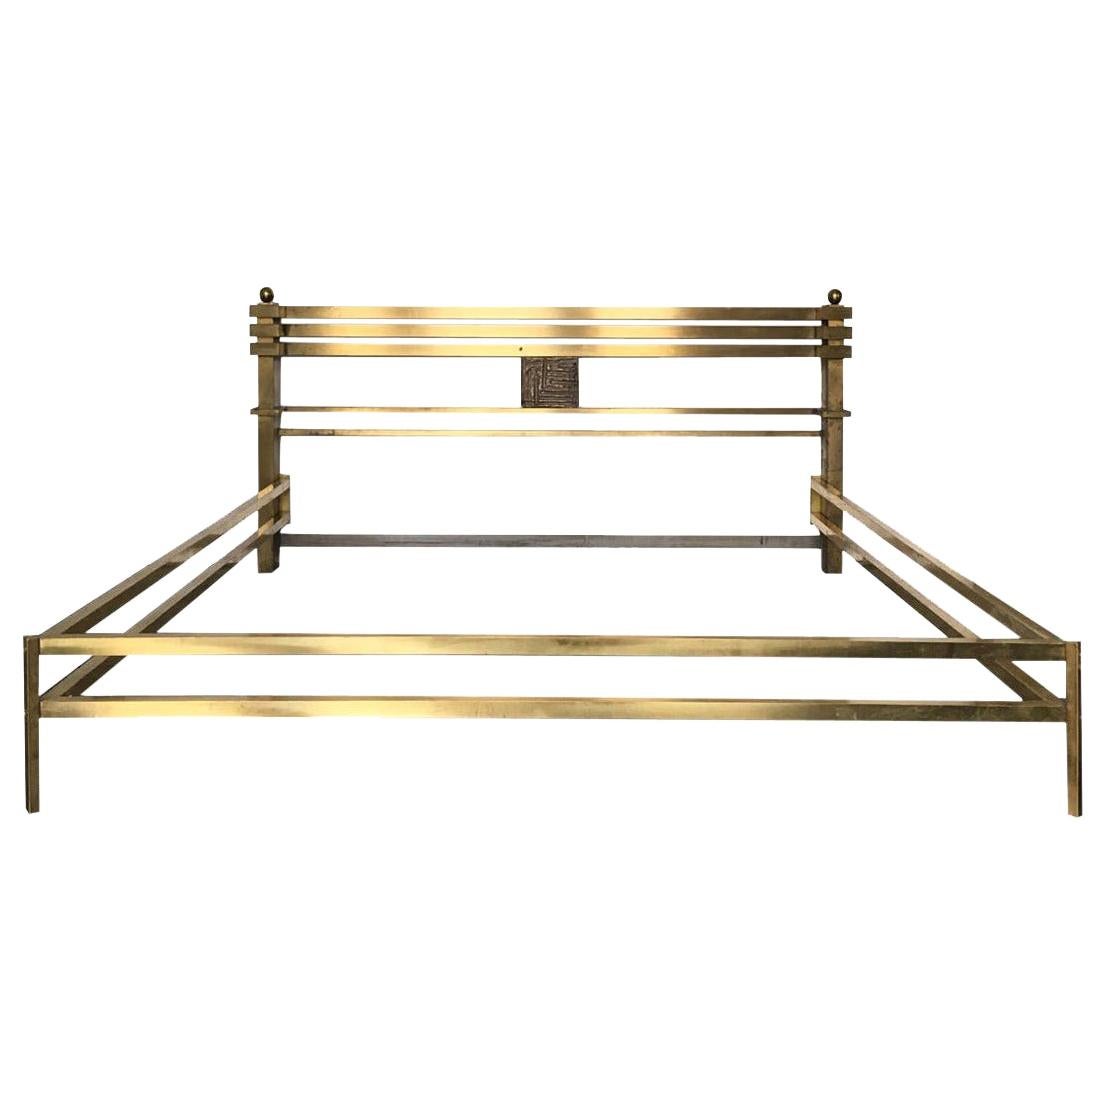 Brass and Bronze Bed Frame Model "Greta" by Frigerio, Italy 1970s For Sale